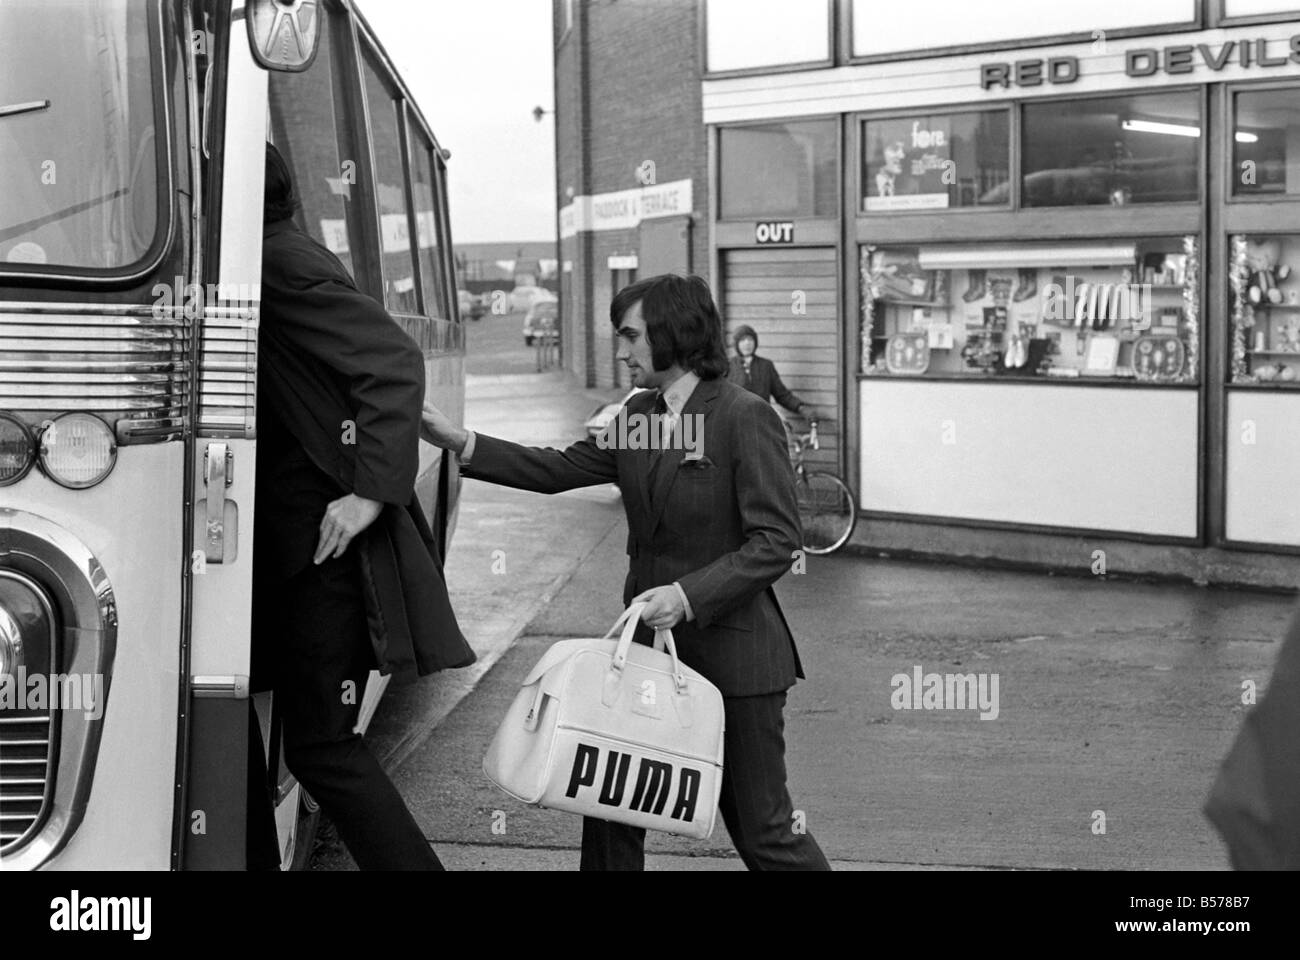 George Best right as he left Old Trafford ground to board the coach on route to Ipswich he had just been suspended and fined. January 1970 70-00102 Stock Photo